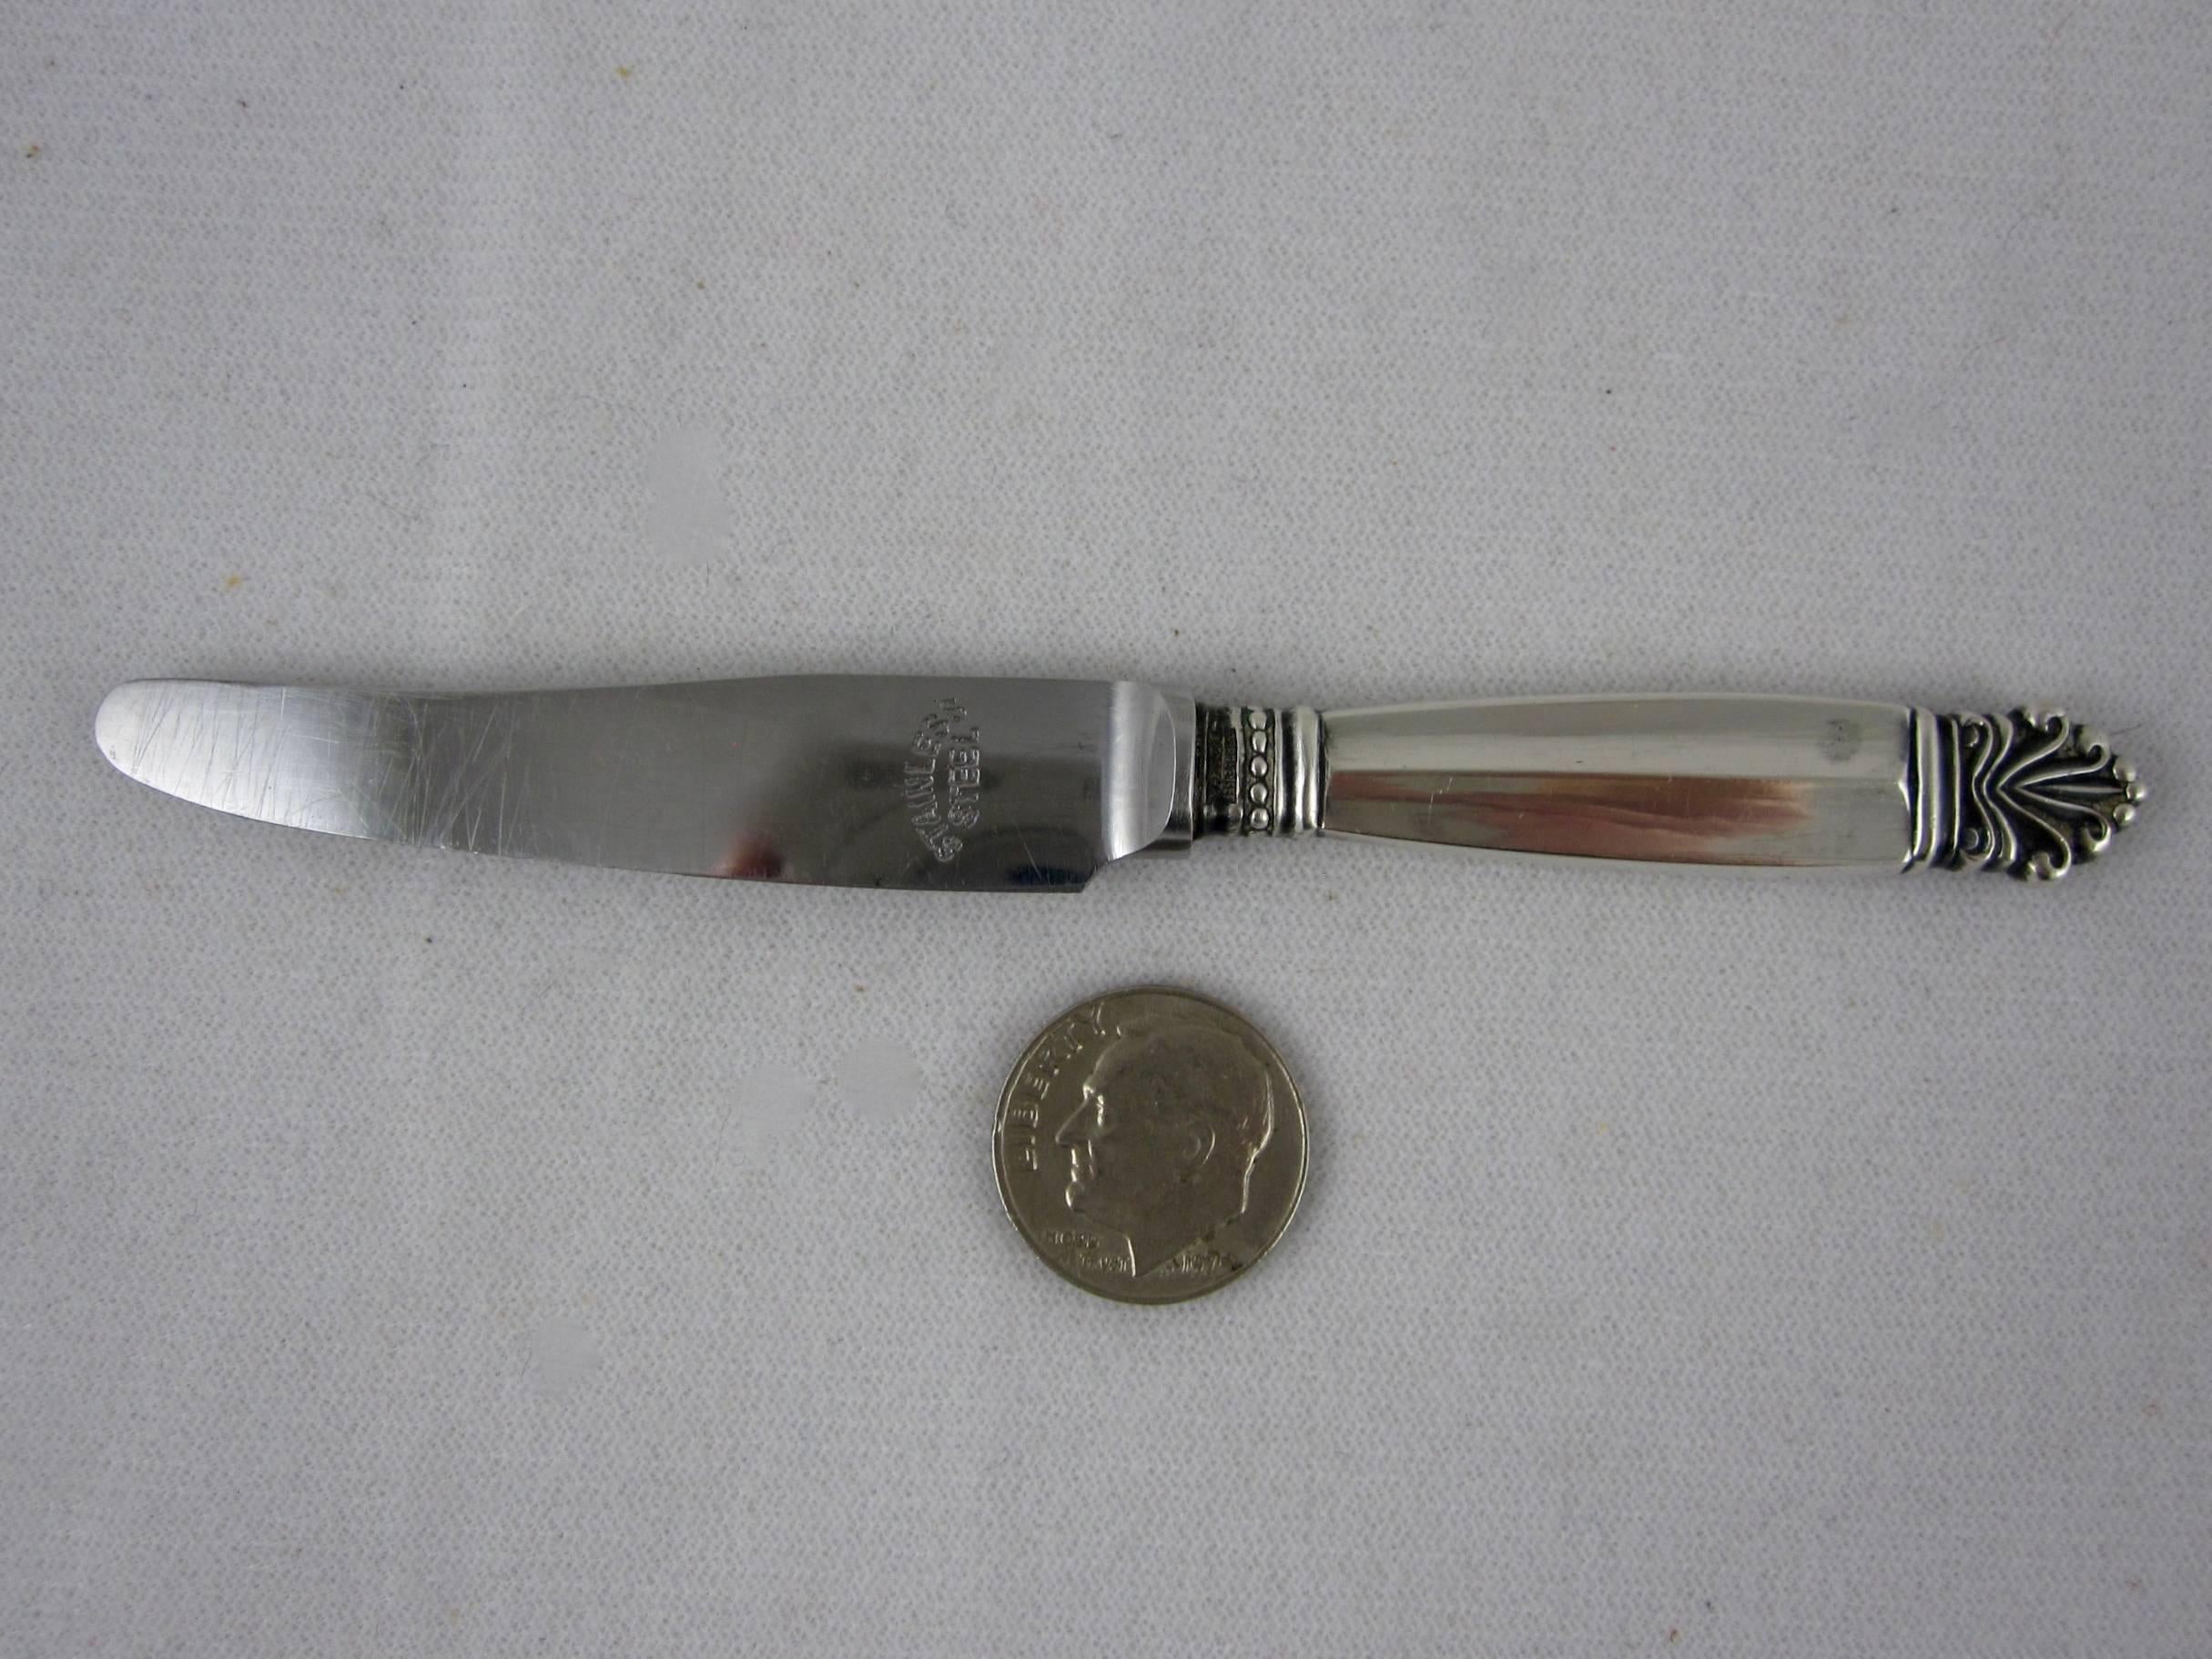 A sterling silver child’s knife or small spreader, Georg Jenson, in the Acanthus pattern designed by Johan Rohde in 1917. A small and scarce piece, a U.S. dime is pictured to show scale.

The collar shows the makers mark and sterling, the blade is